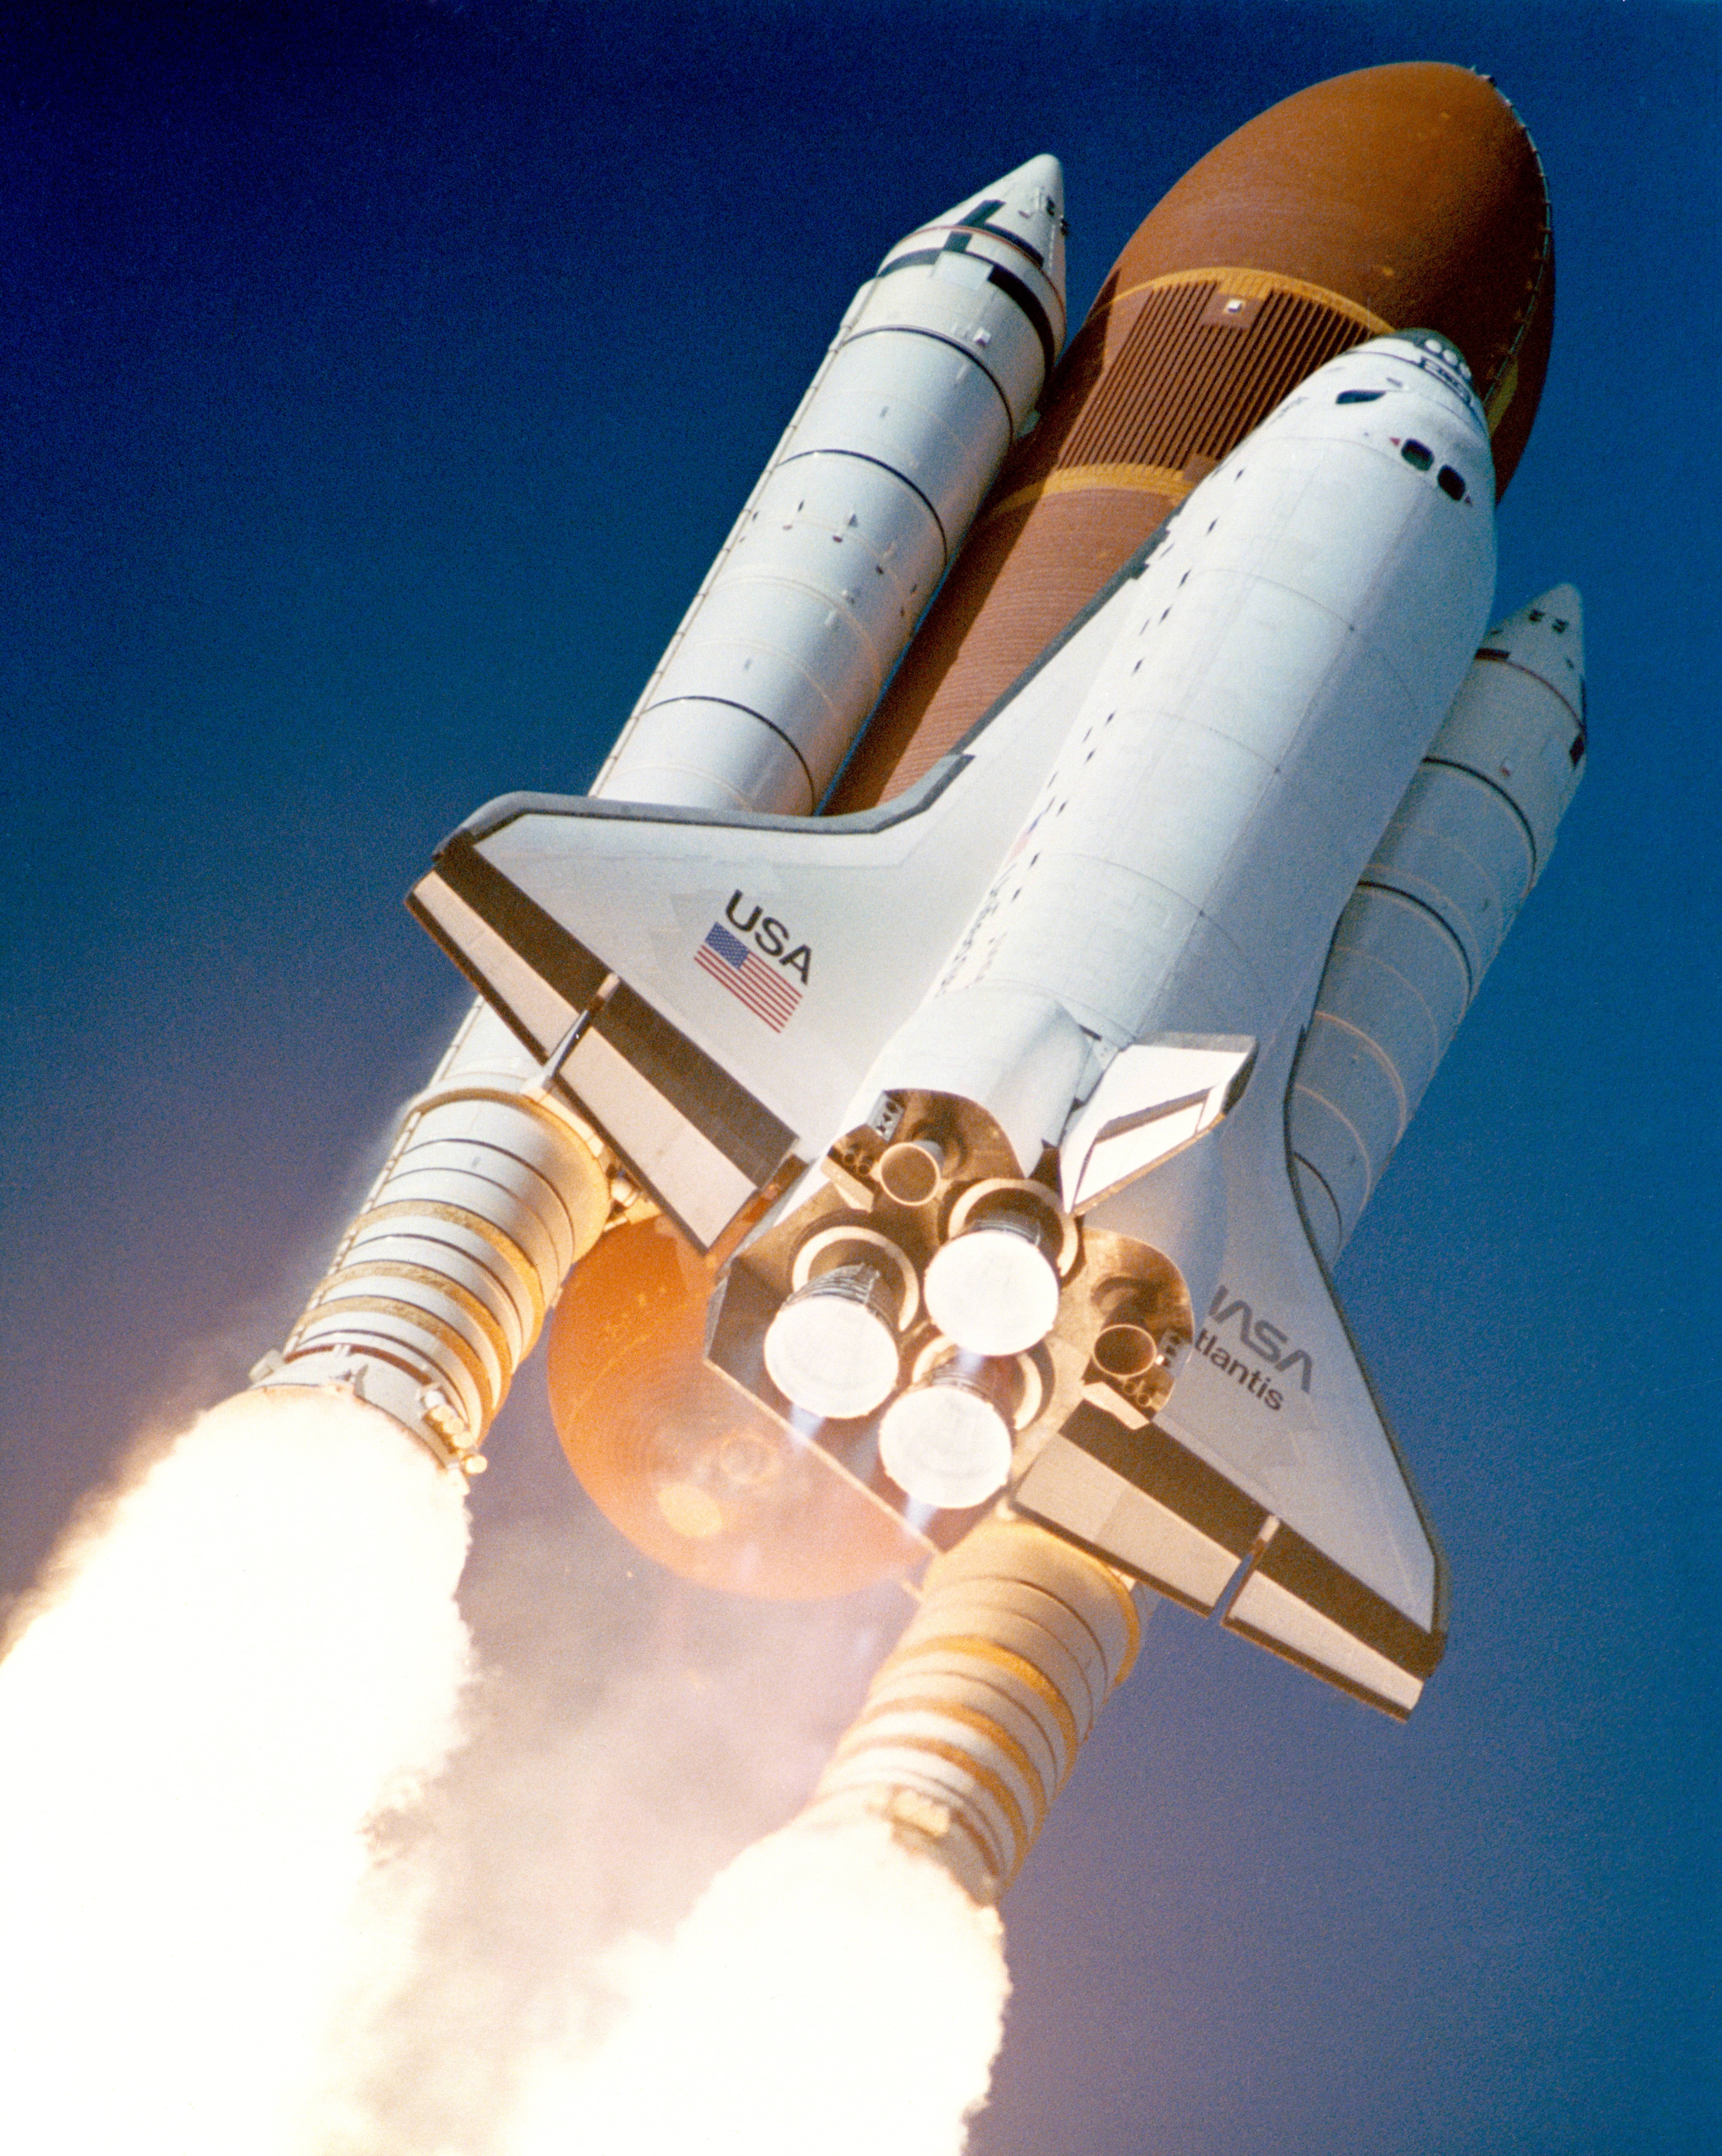 How many Space Shuttles were built by NASA?